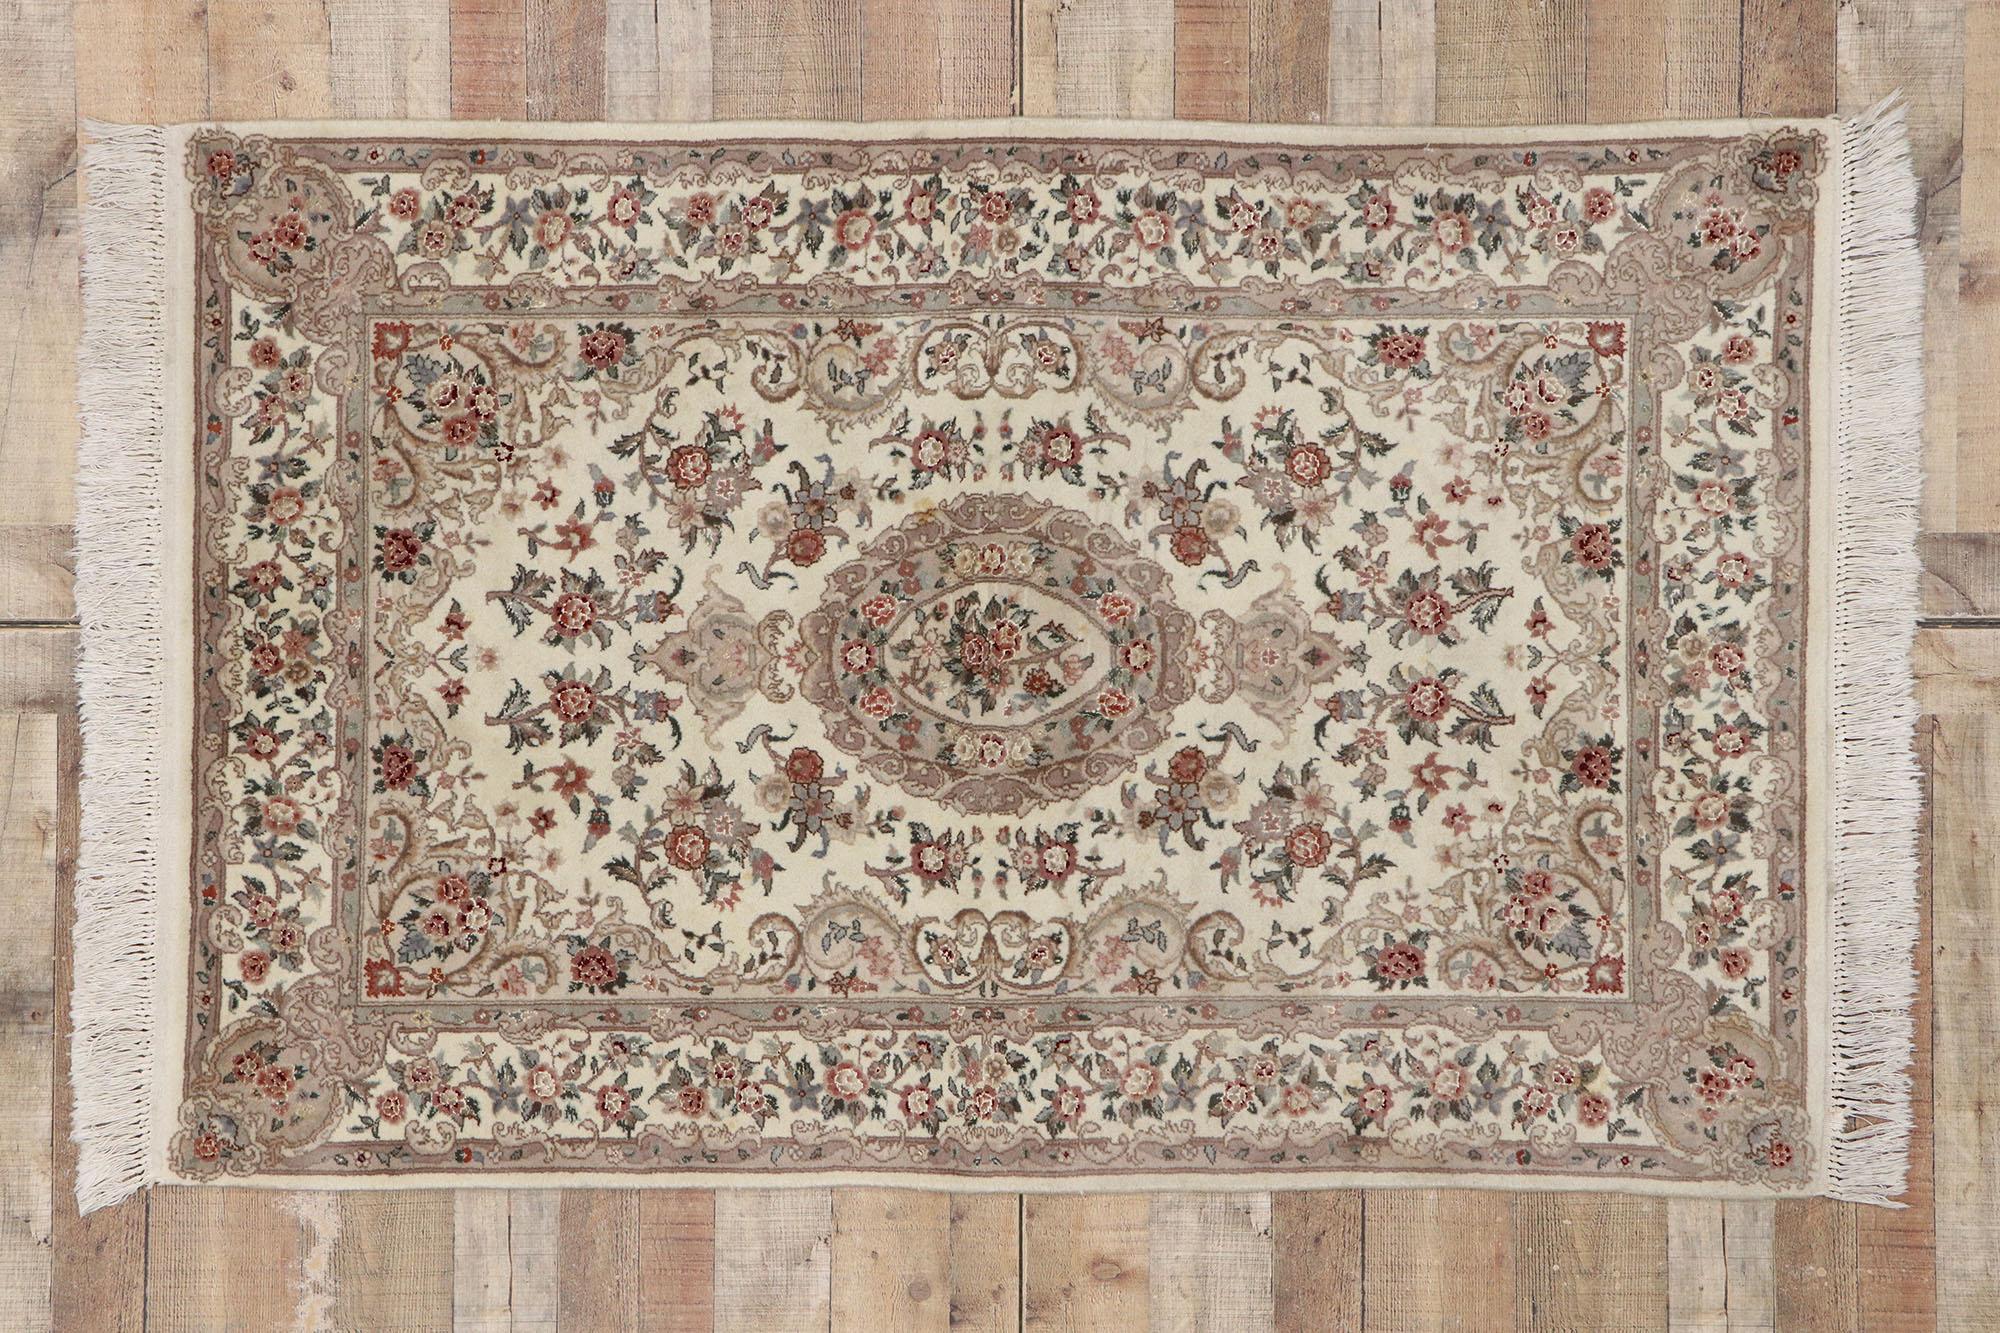 Vintage Persian Tabriz Chinese Floral Rug with Art Nouveau Rococo Style For Sale 3